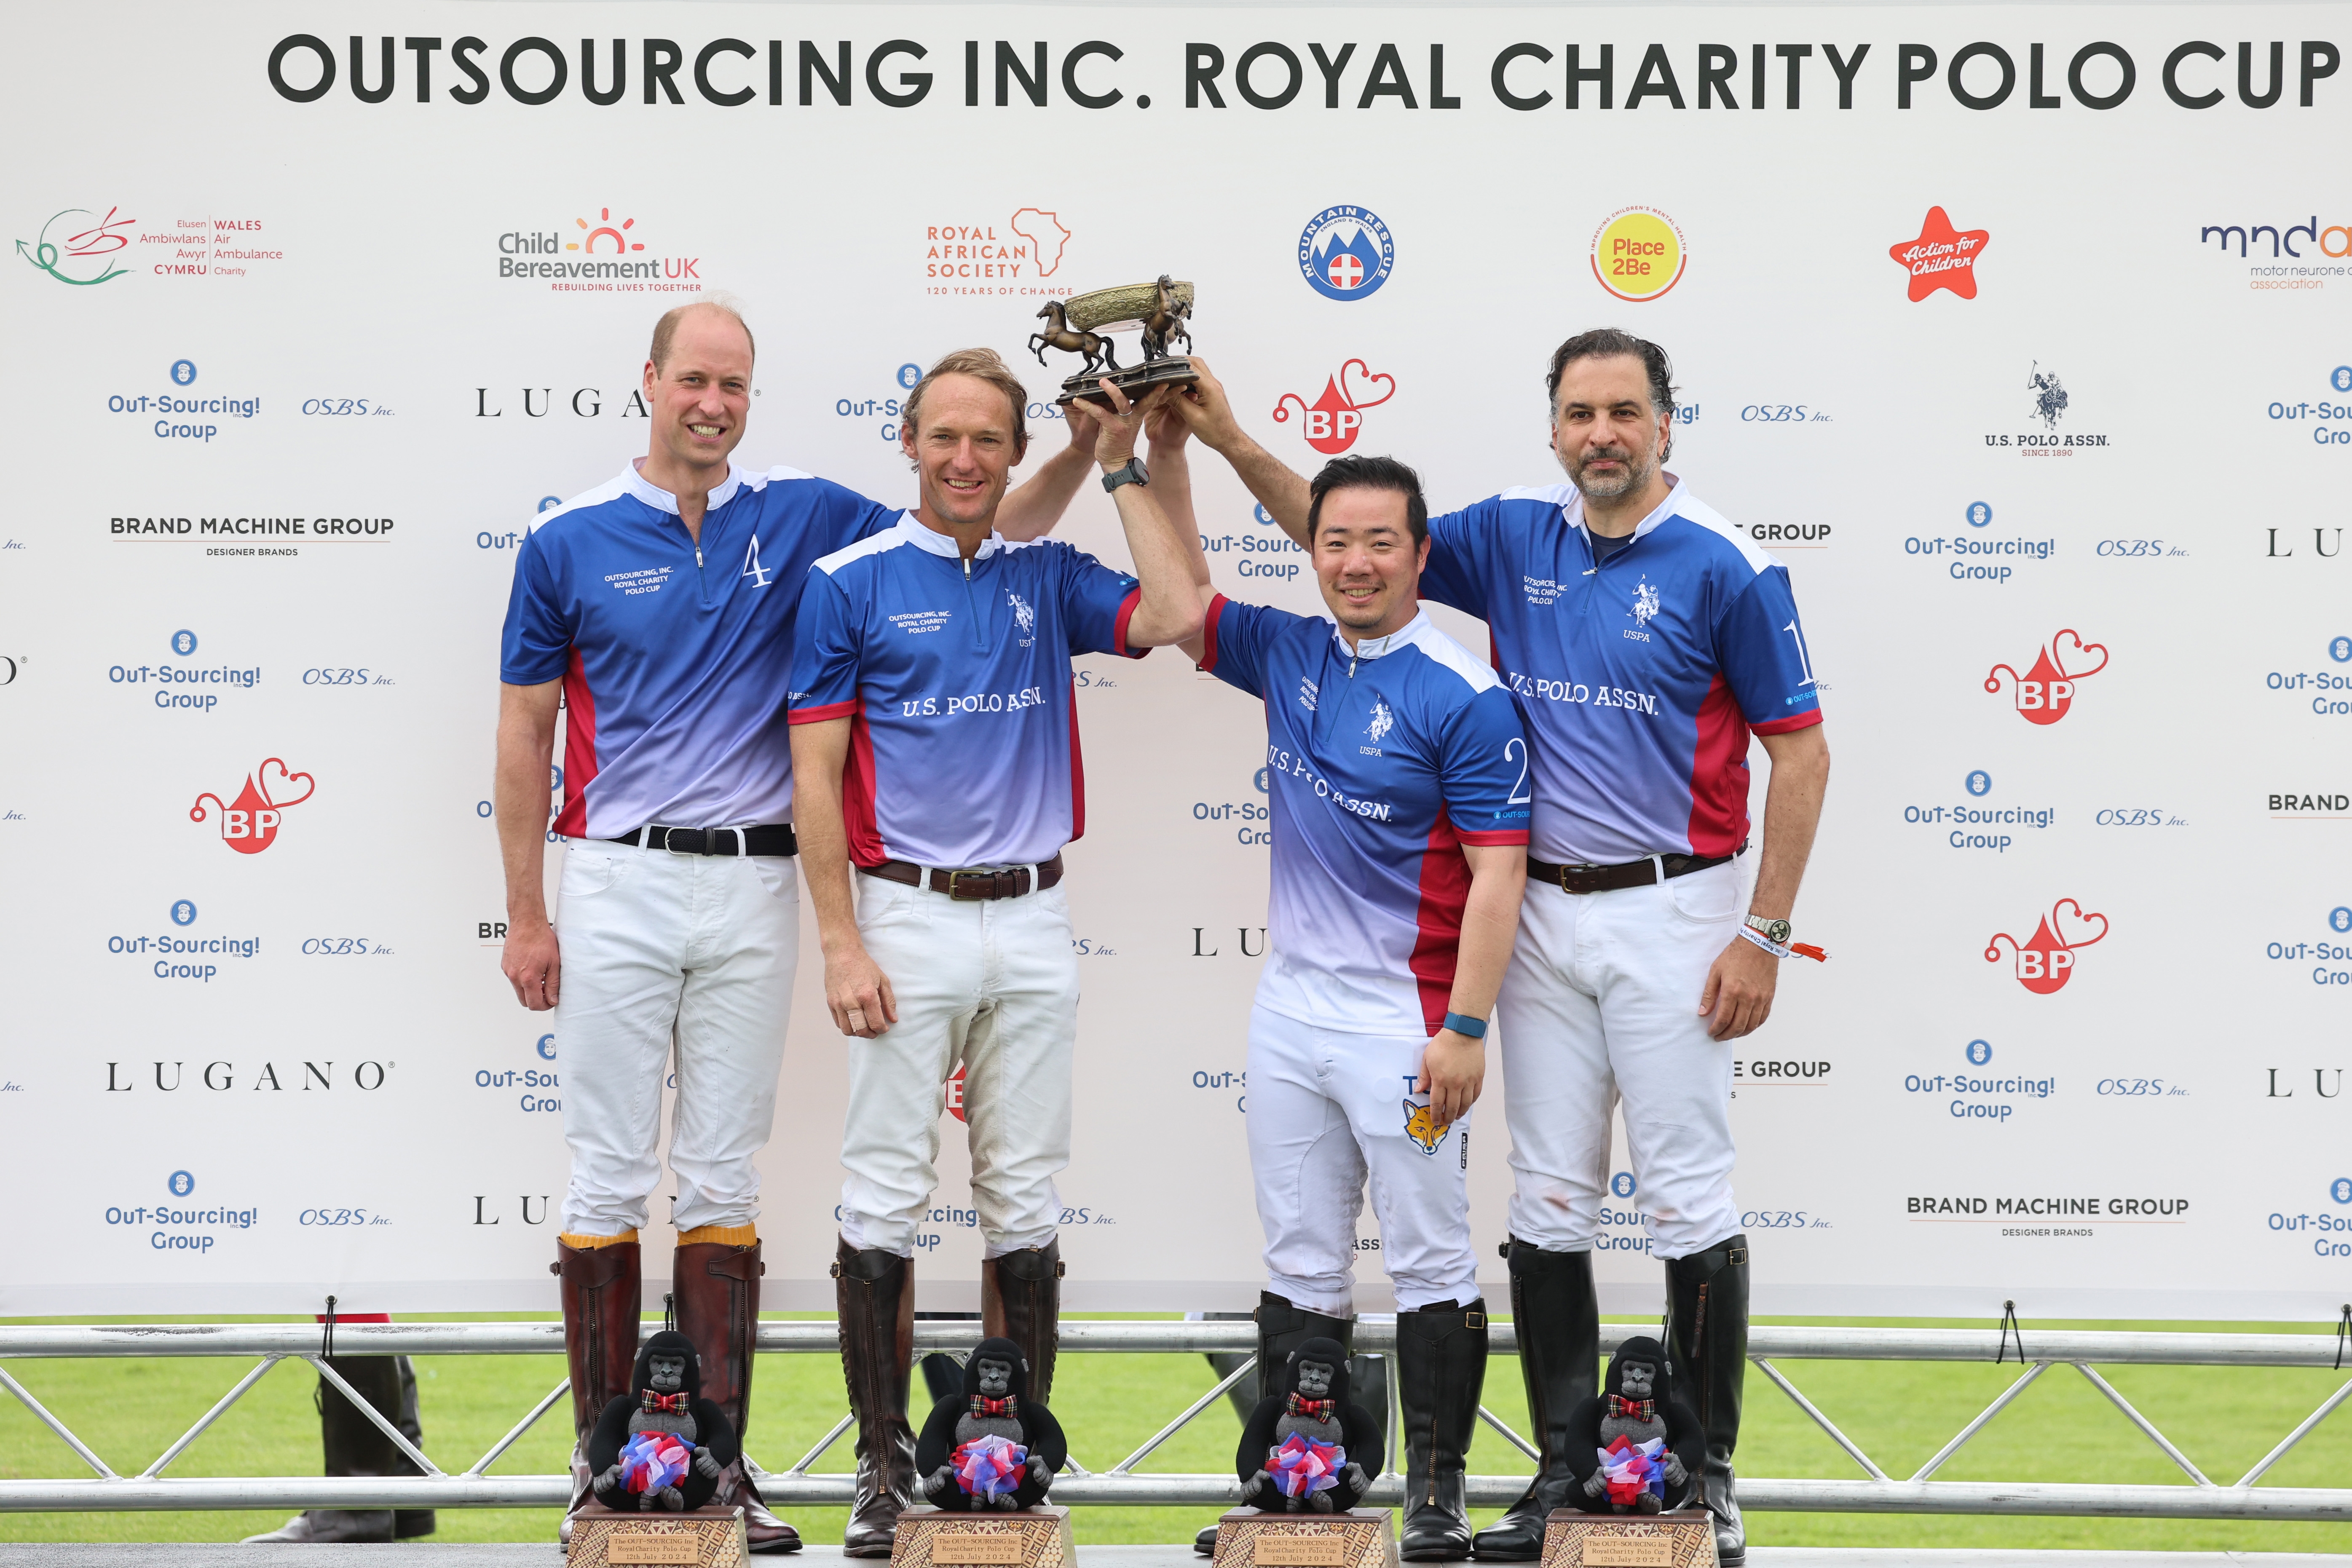 The Prince of Wales and the victorious U.S. Polo Assn. team